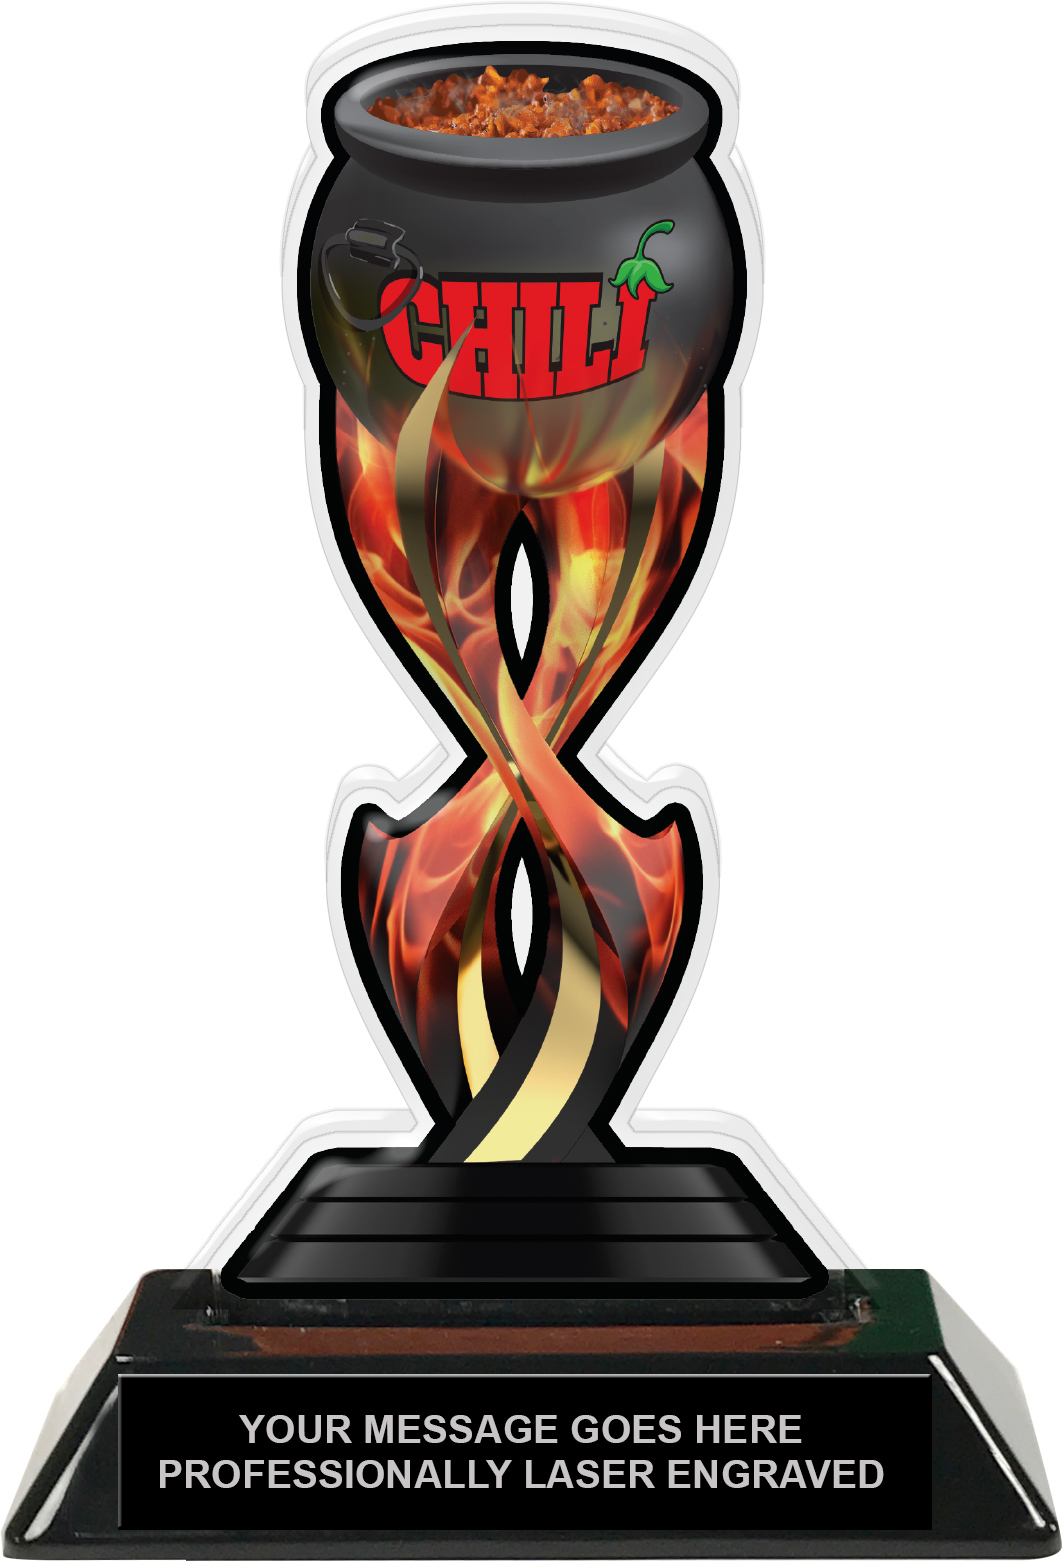 Quiz Resin trophy Award in 3 Sizes with FREE Engraving up to 30 Letters 